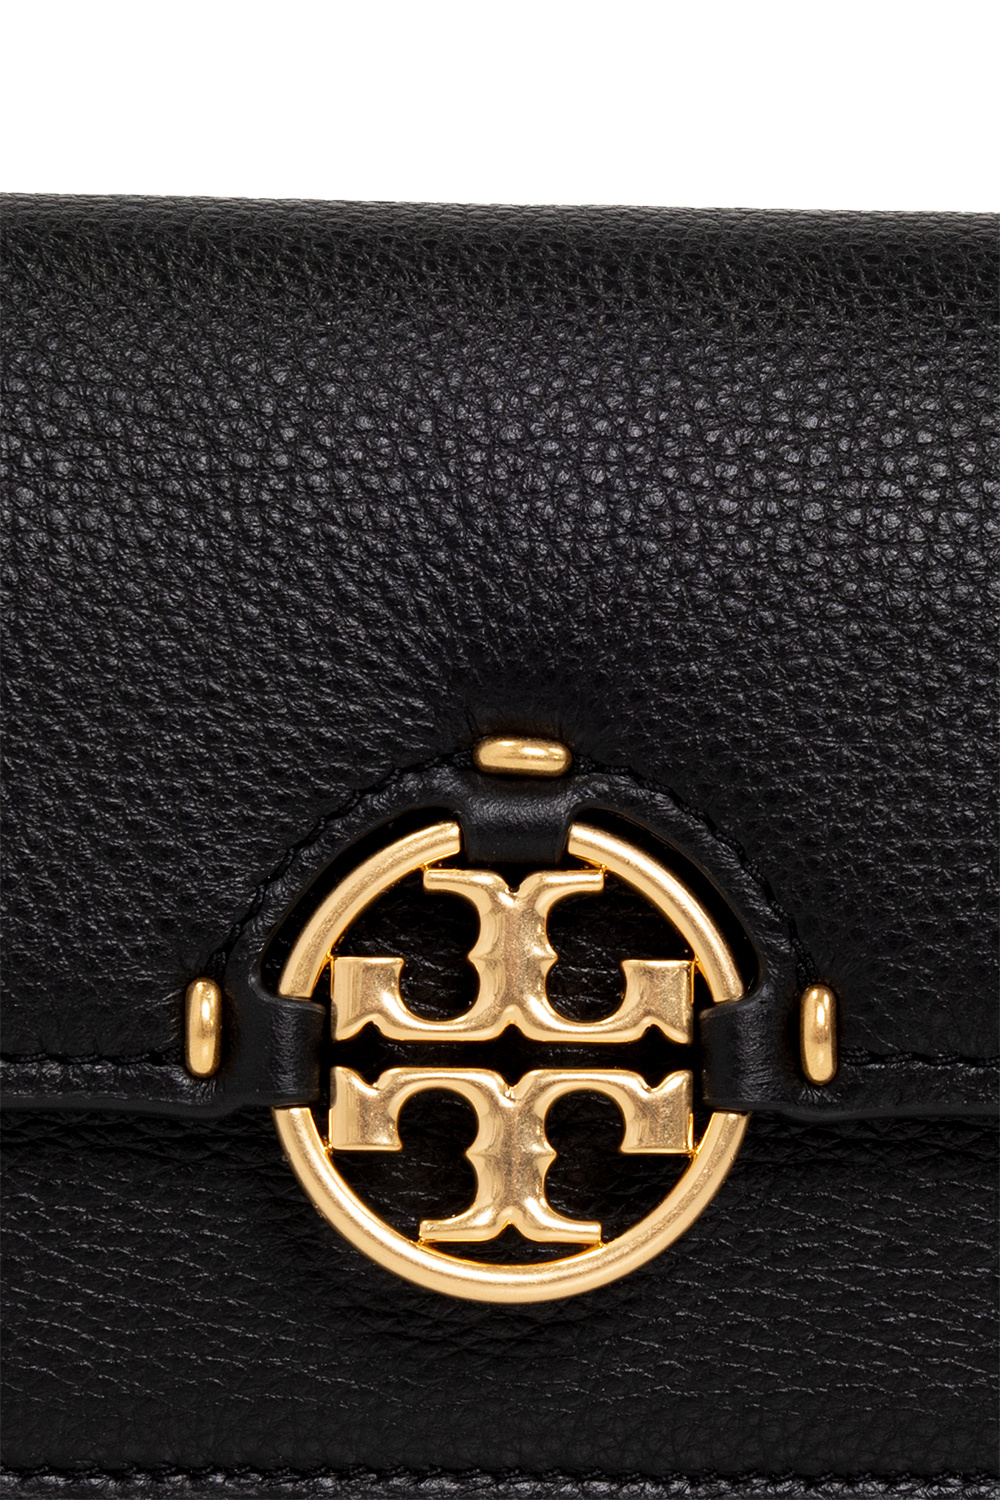 Tory Burch ‘Miller’ strapped wallet